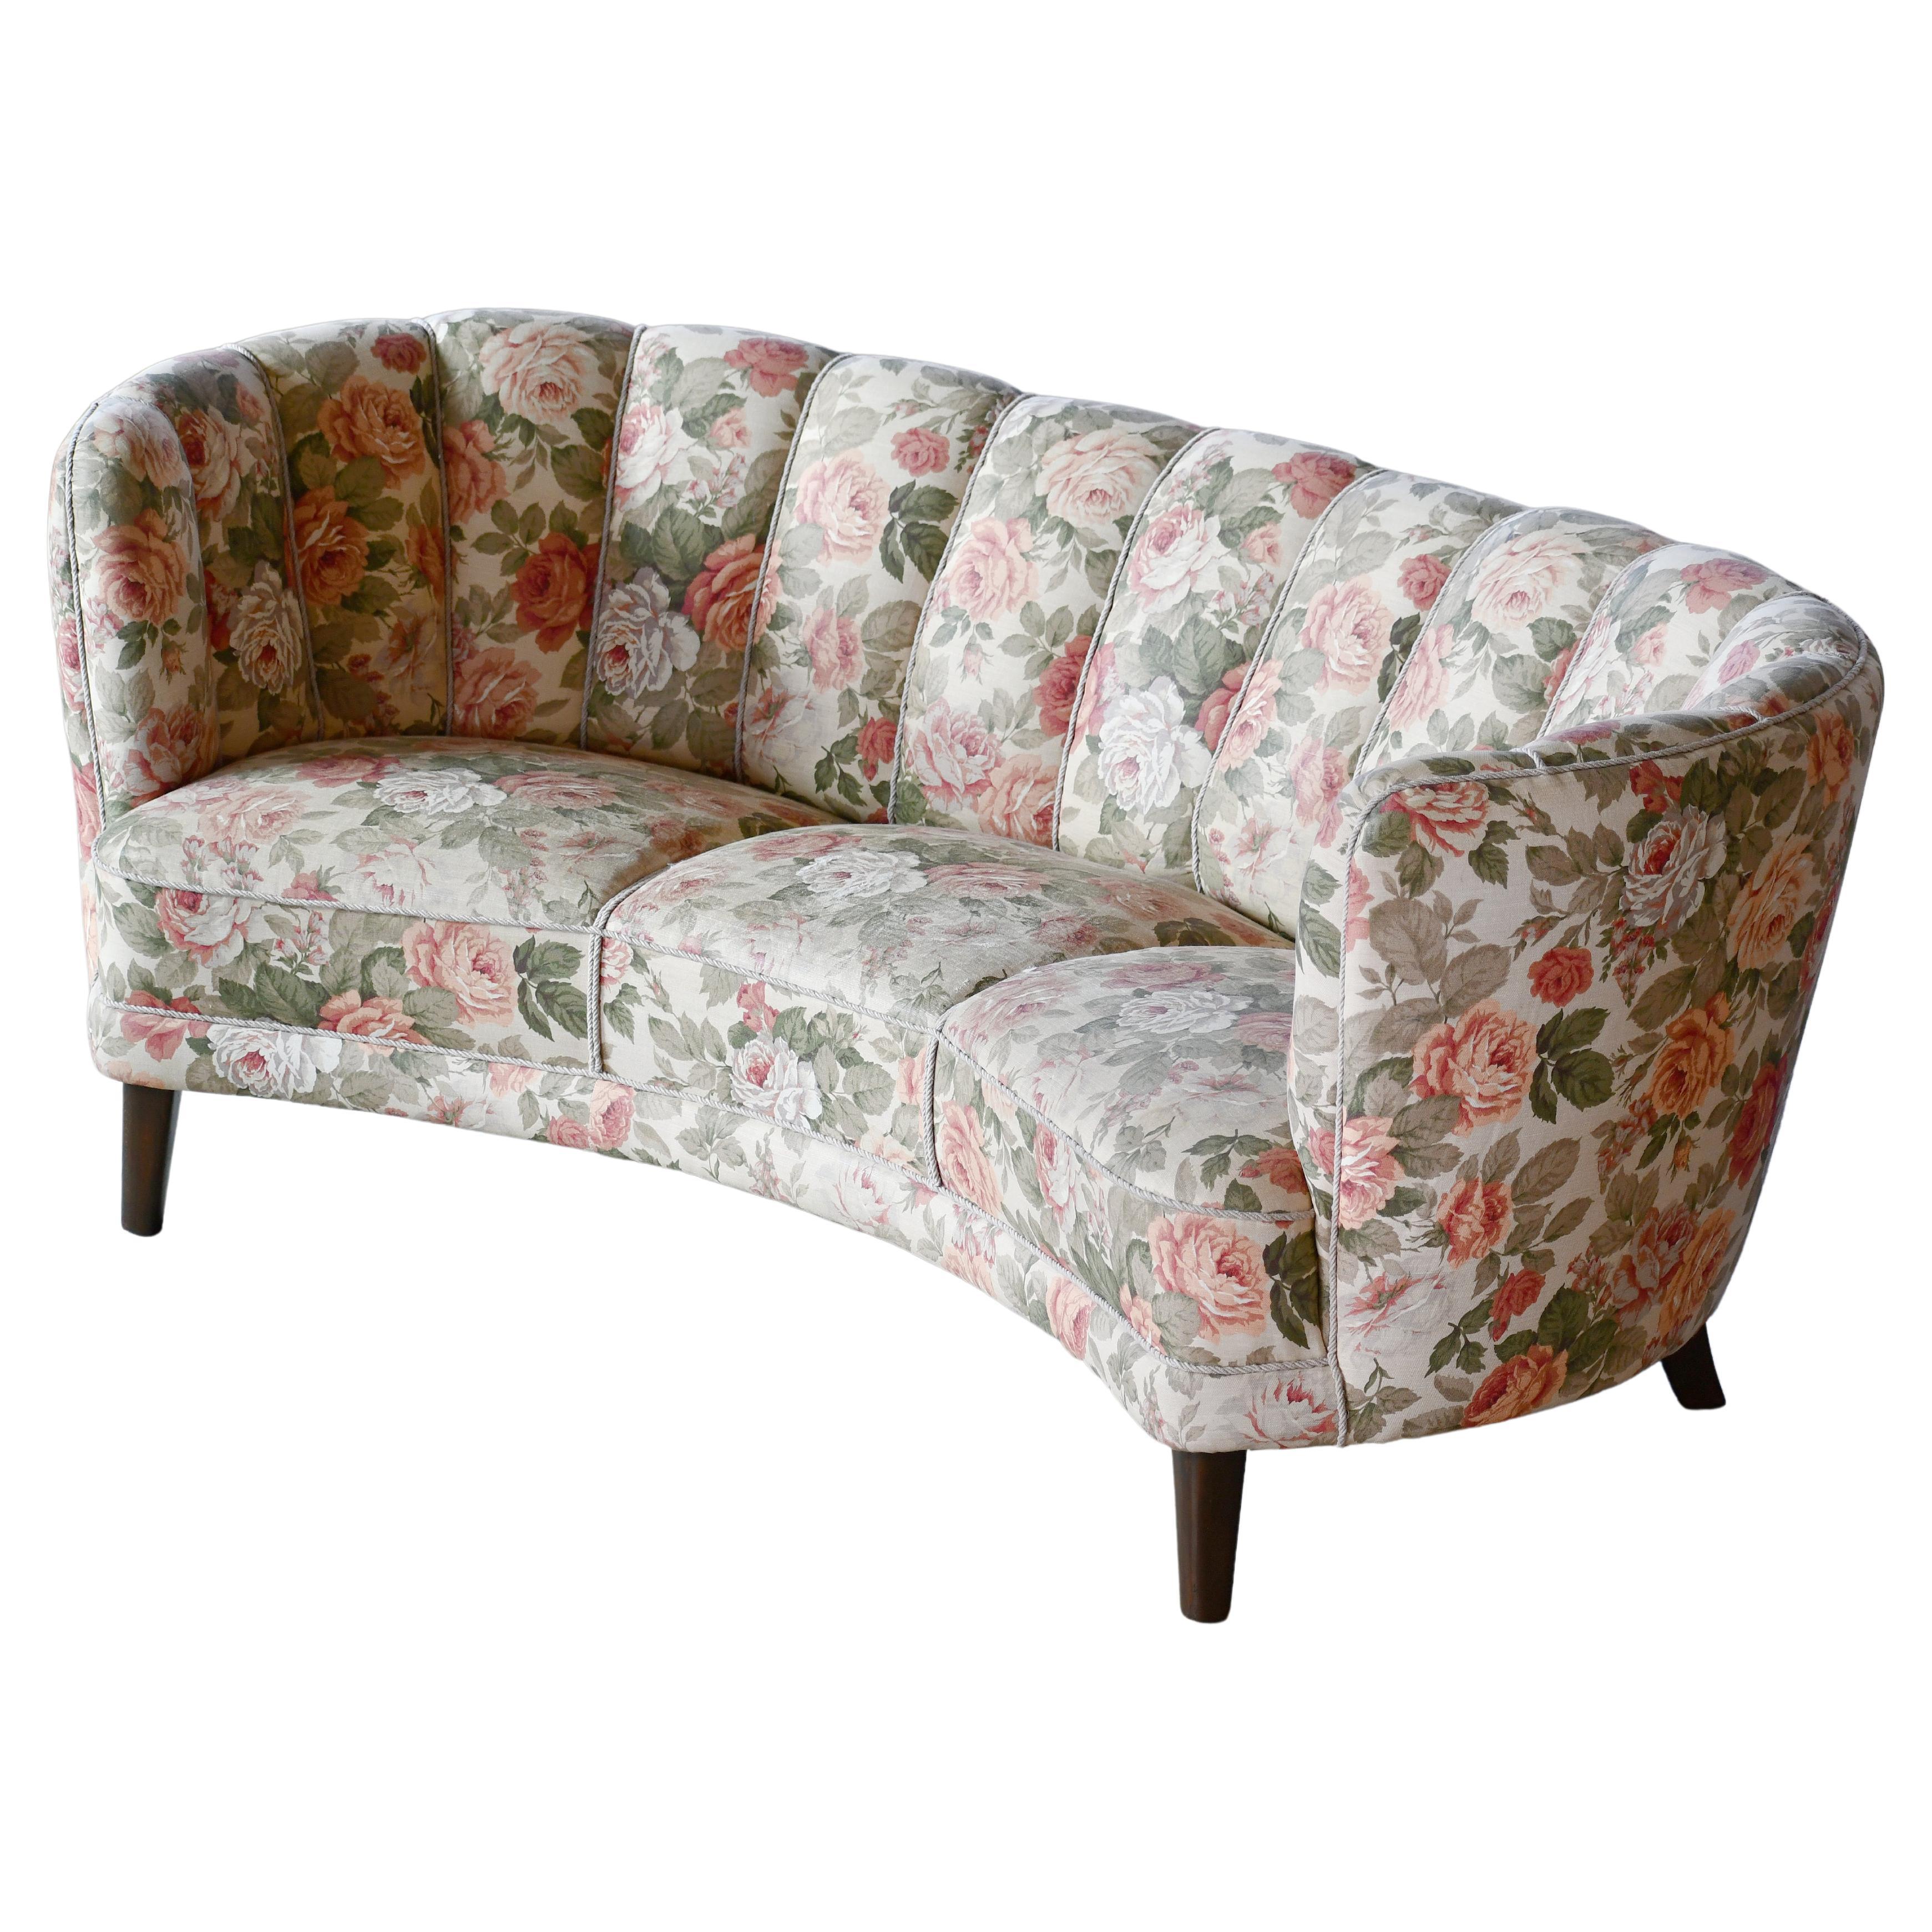 Danish 1940s Large Banana Form Curved Sofa in Floral Fabric For Sale